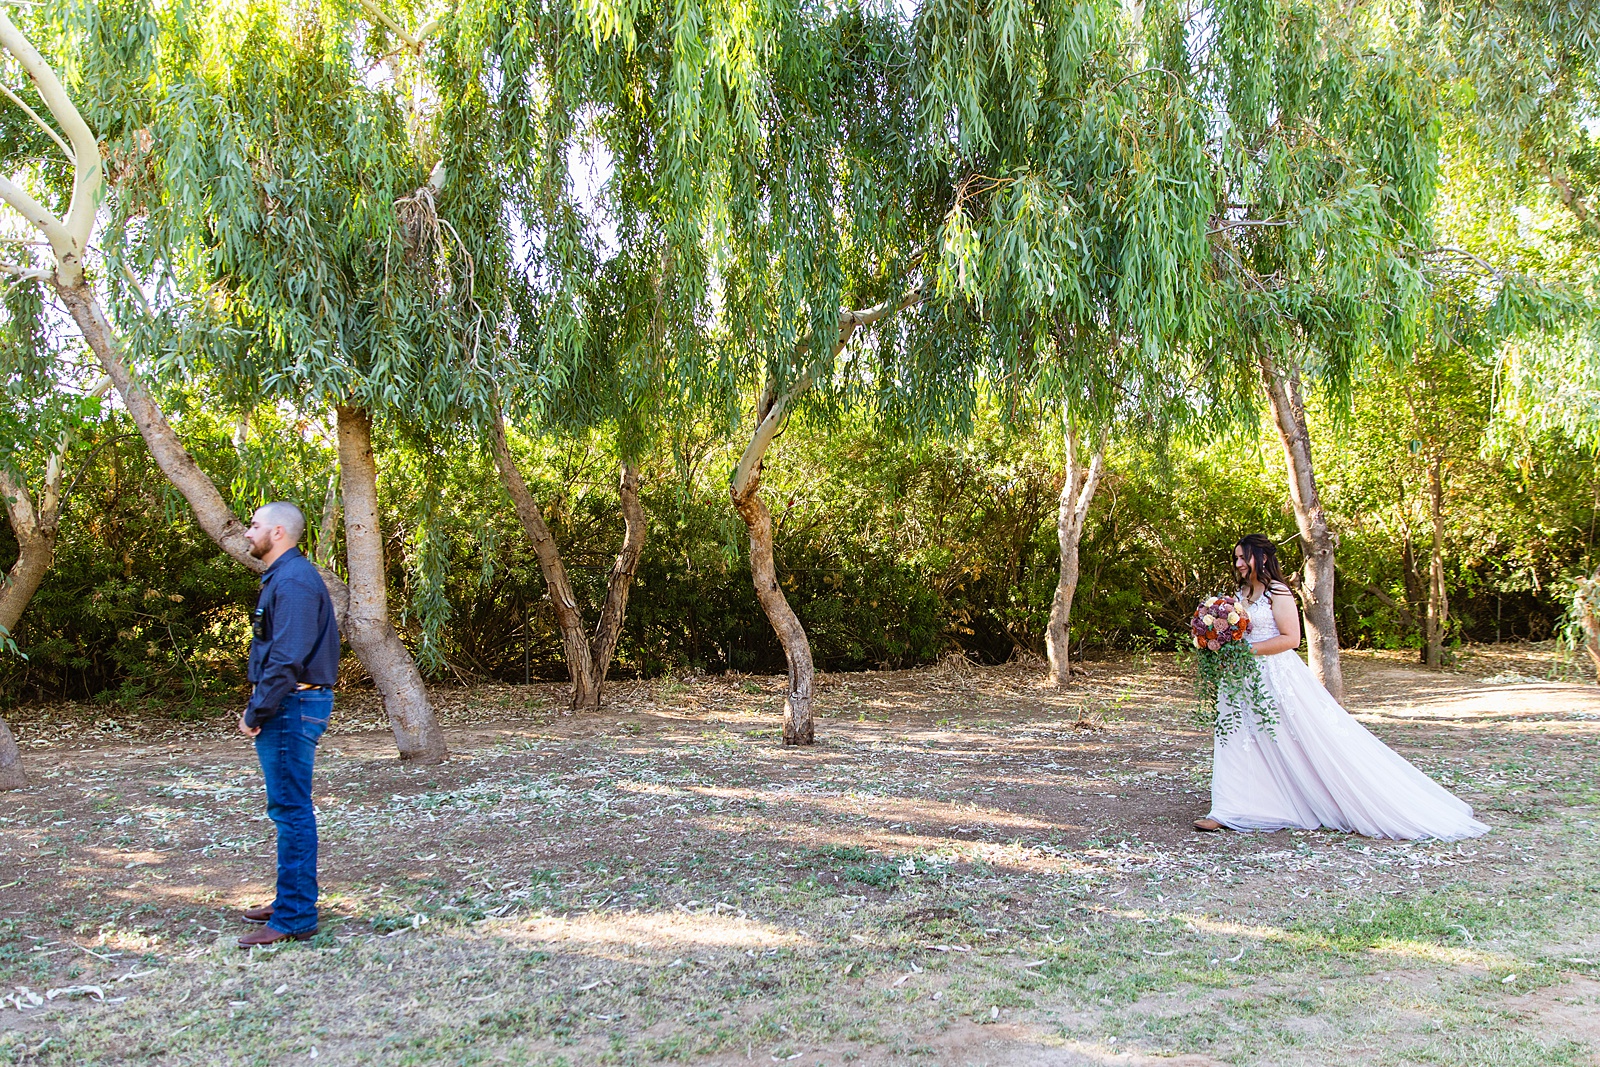 Bride & Groom's first look at intimate backyard wedding by Phoenix wedding photographer Juniper and Co Photography.